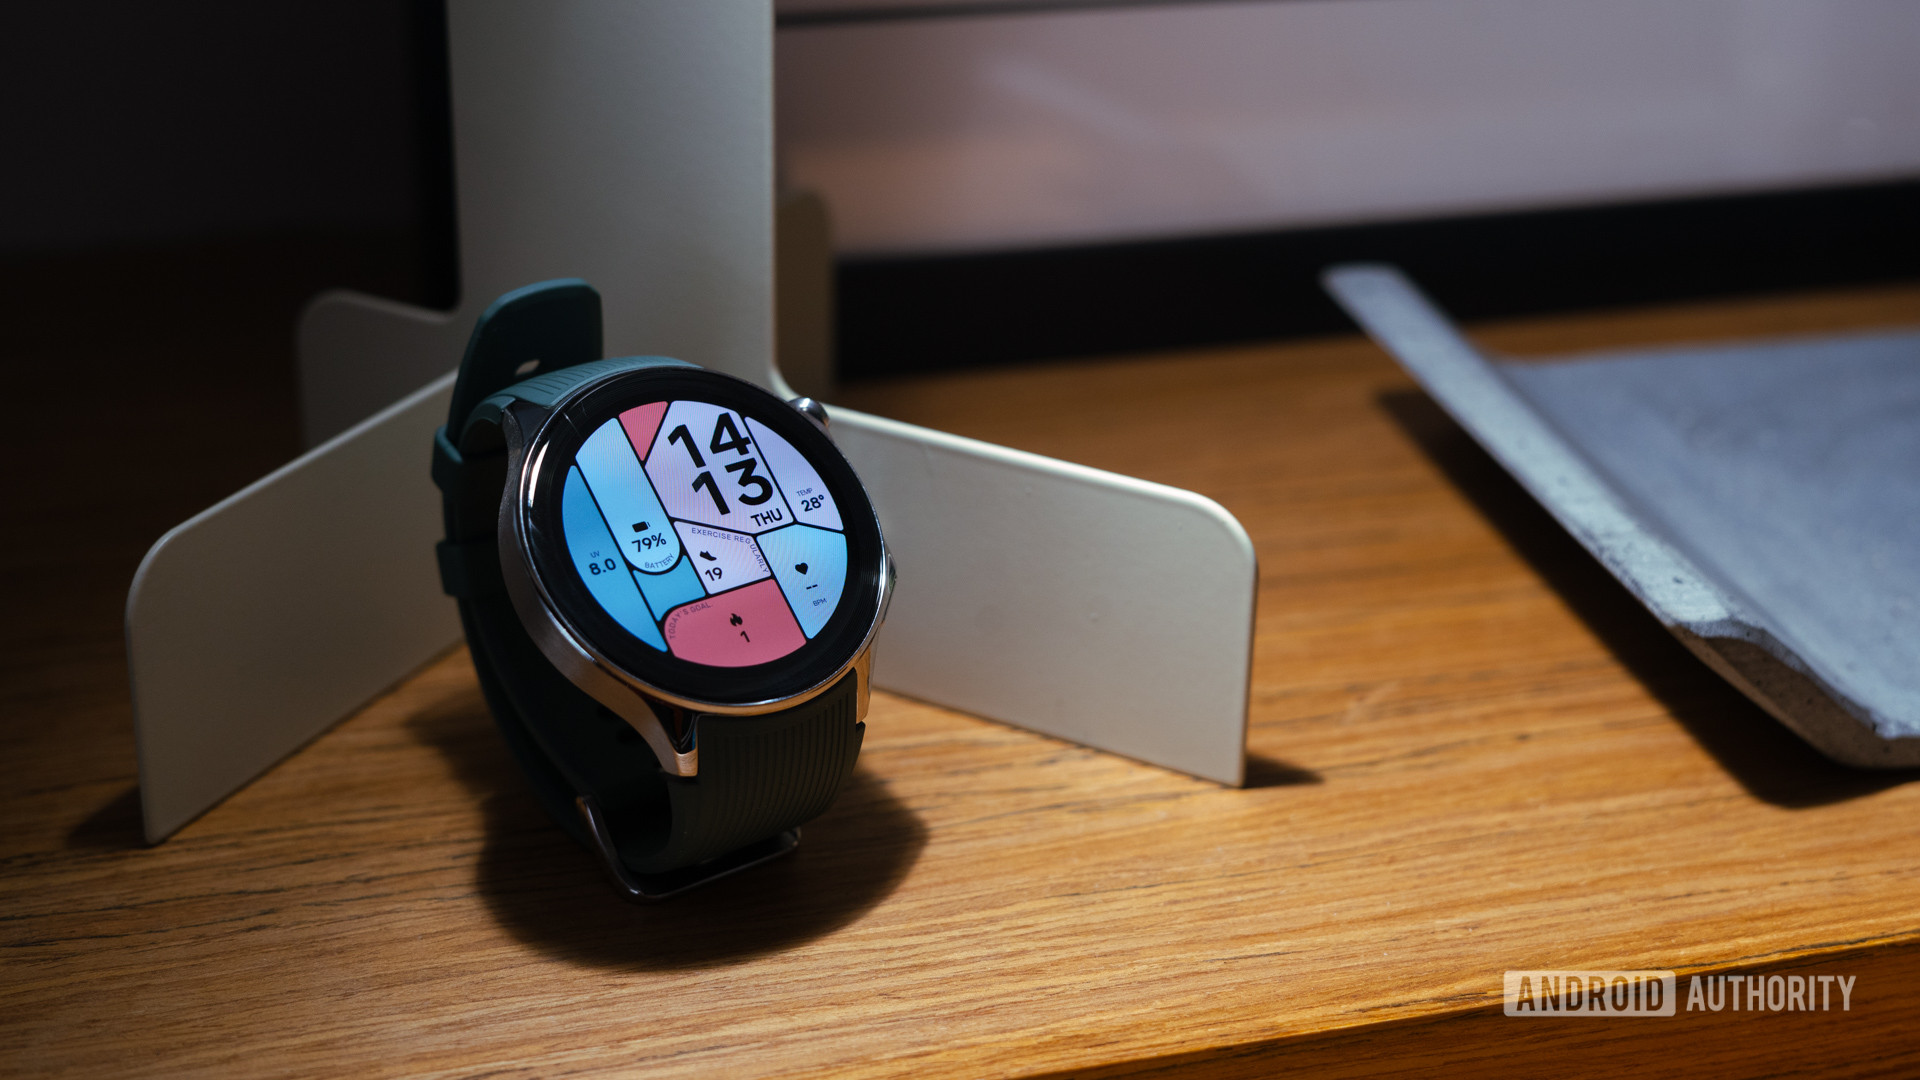 A great smartwatch, held back by Google’s shortcomings